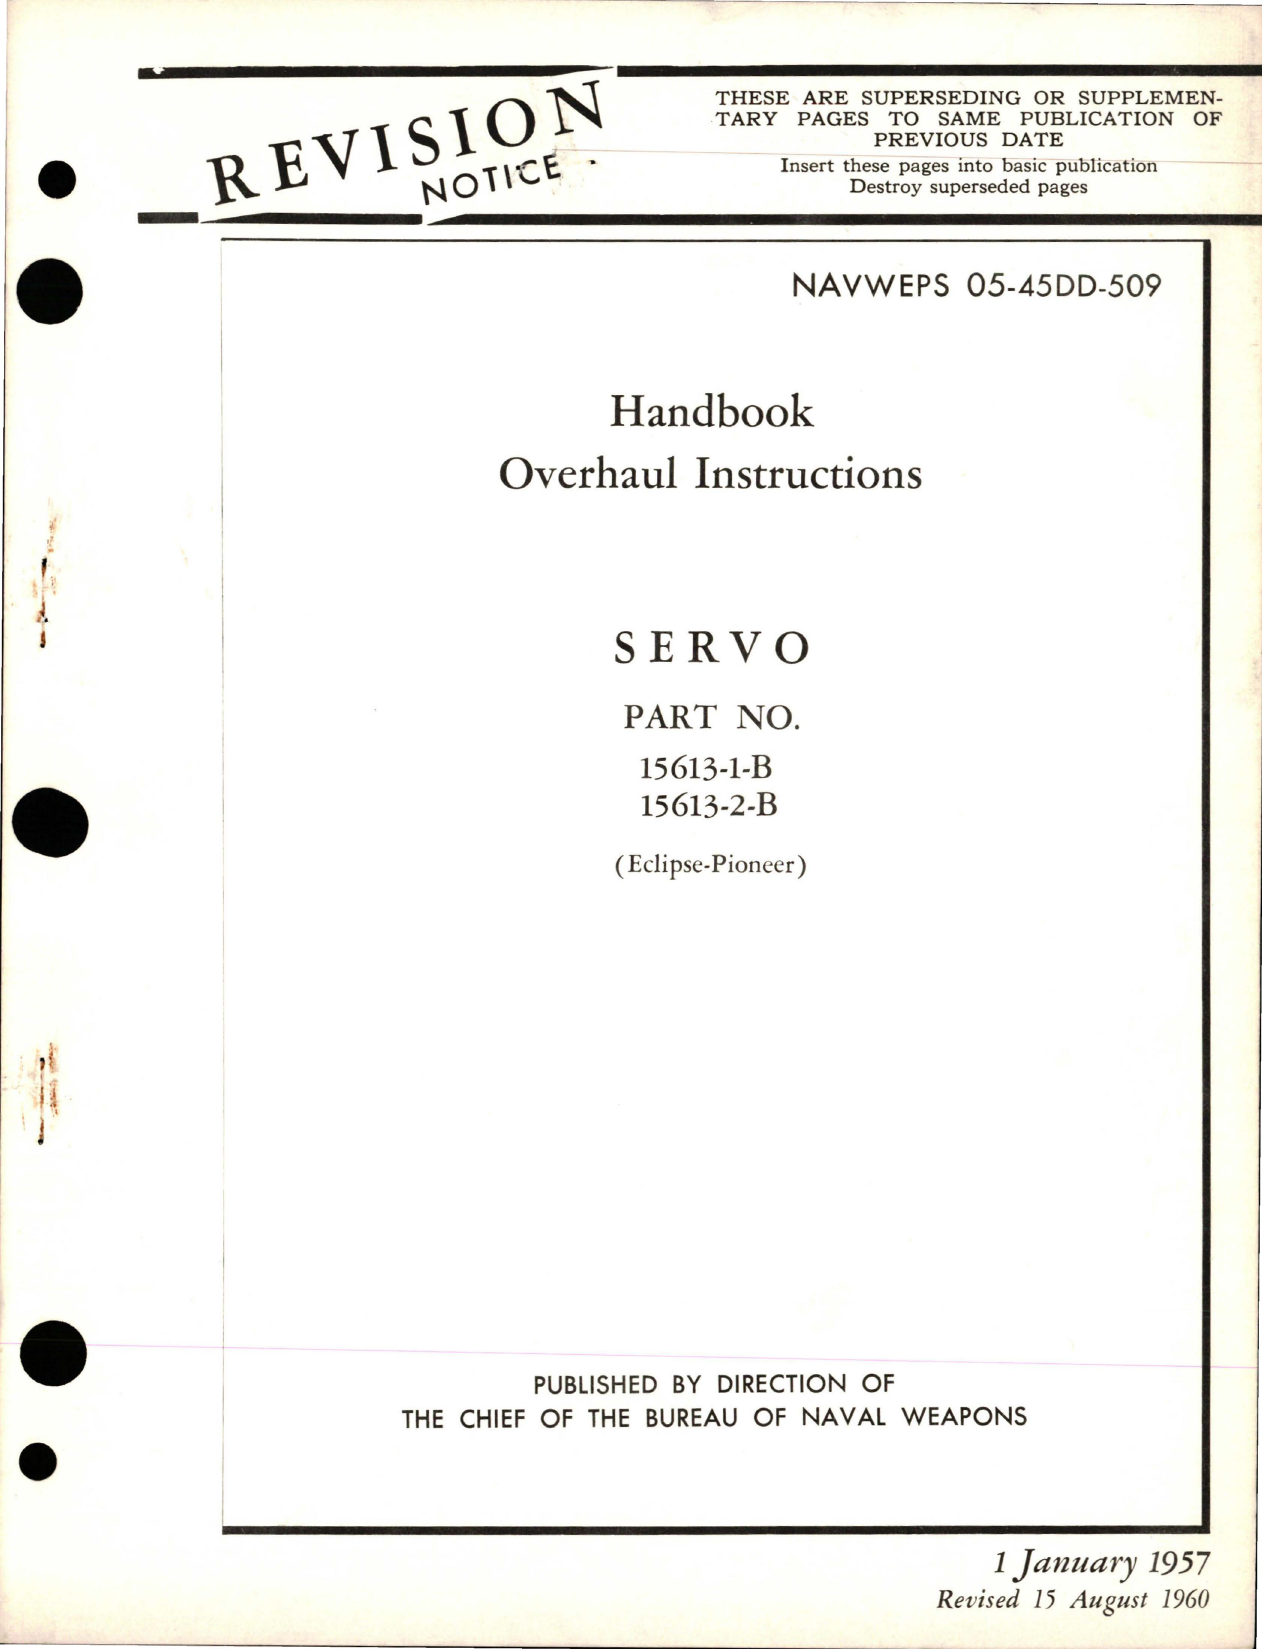 Sample page 1 from AirCorps Library document: Overhaul Instructions for Servo - Part 15613-1-B and 15613-2-B